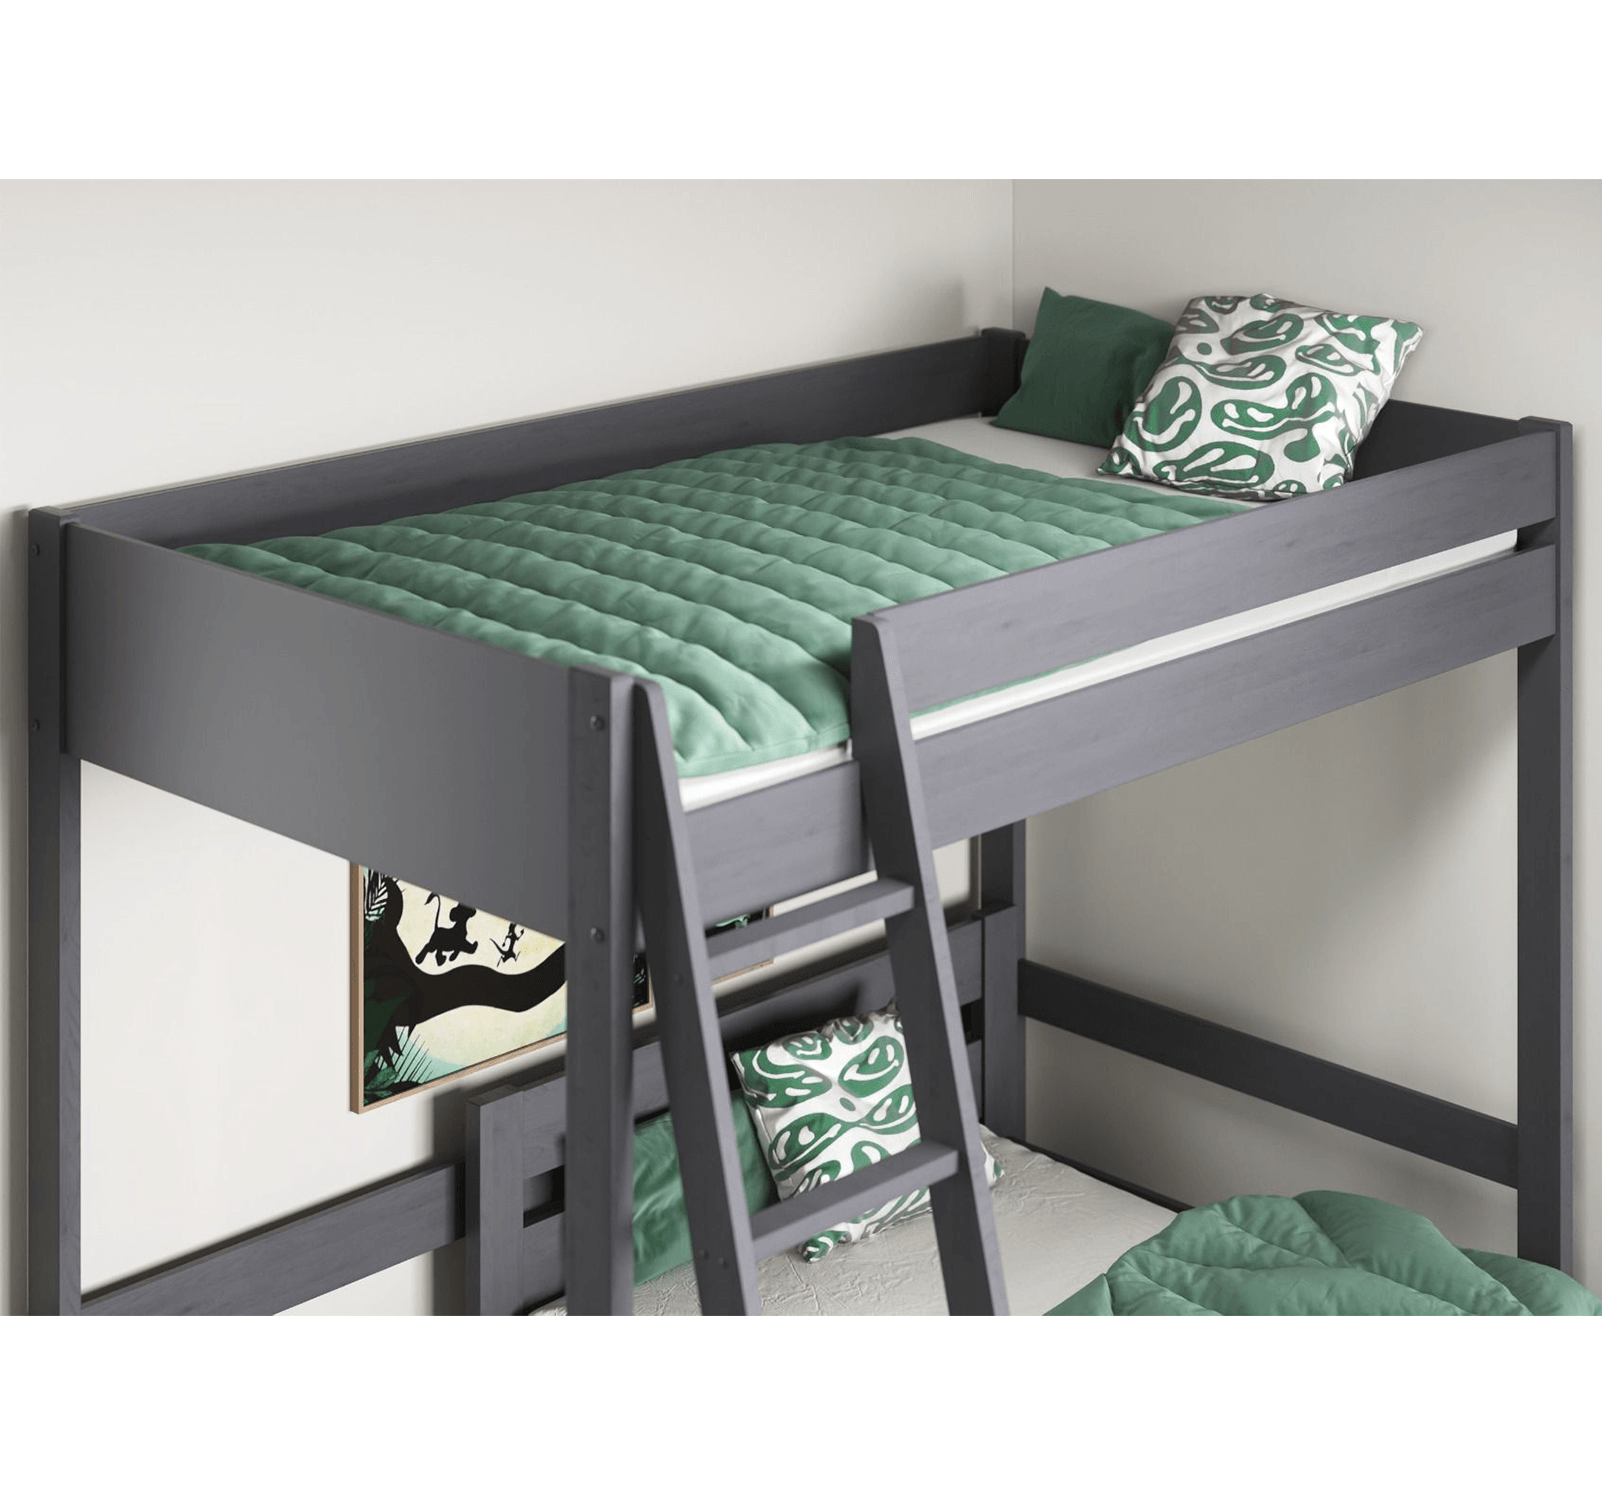 Noomi Tera Small Double High Sleeper with Single L Shaped Bunk Bed Frame in Grey - Complete Comfort Beds